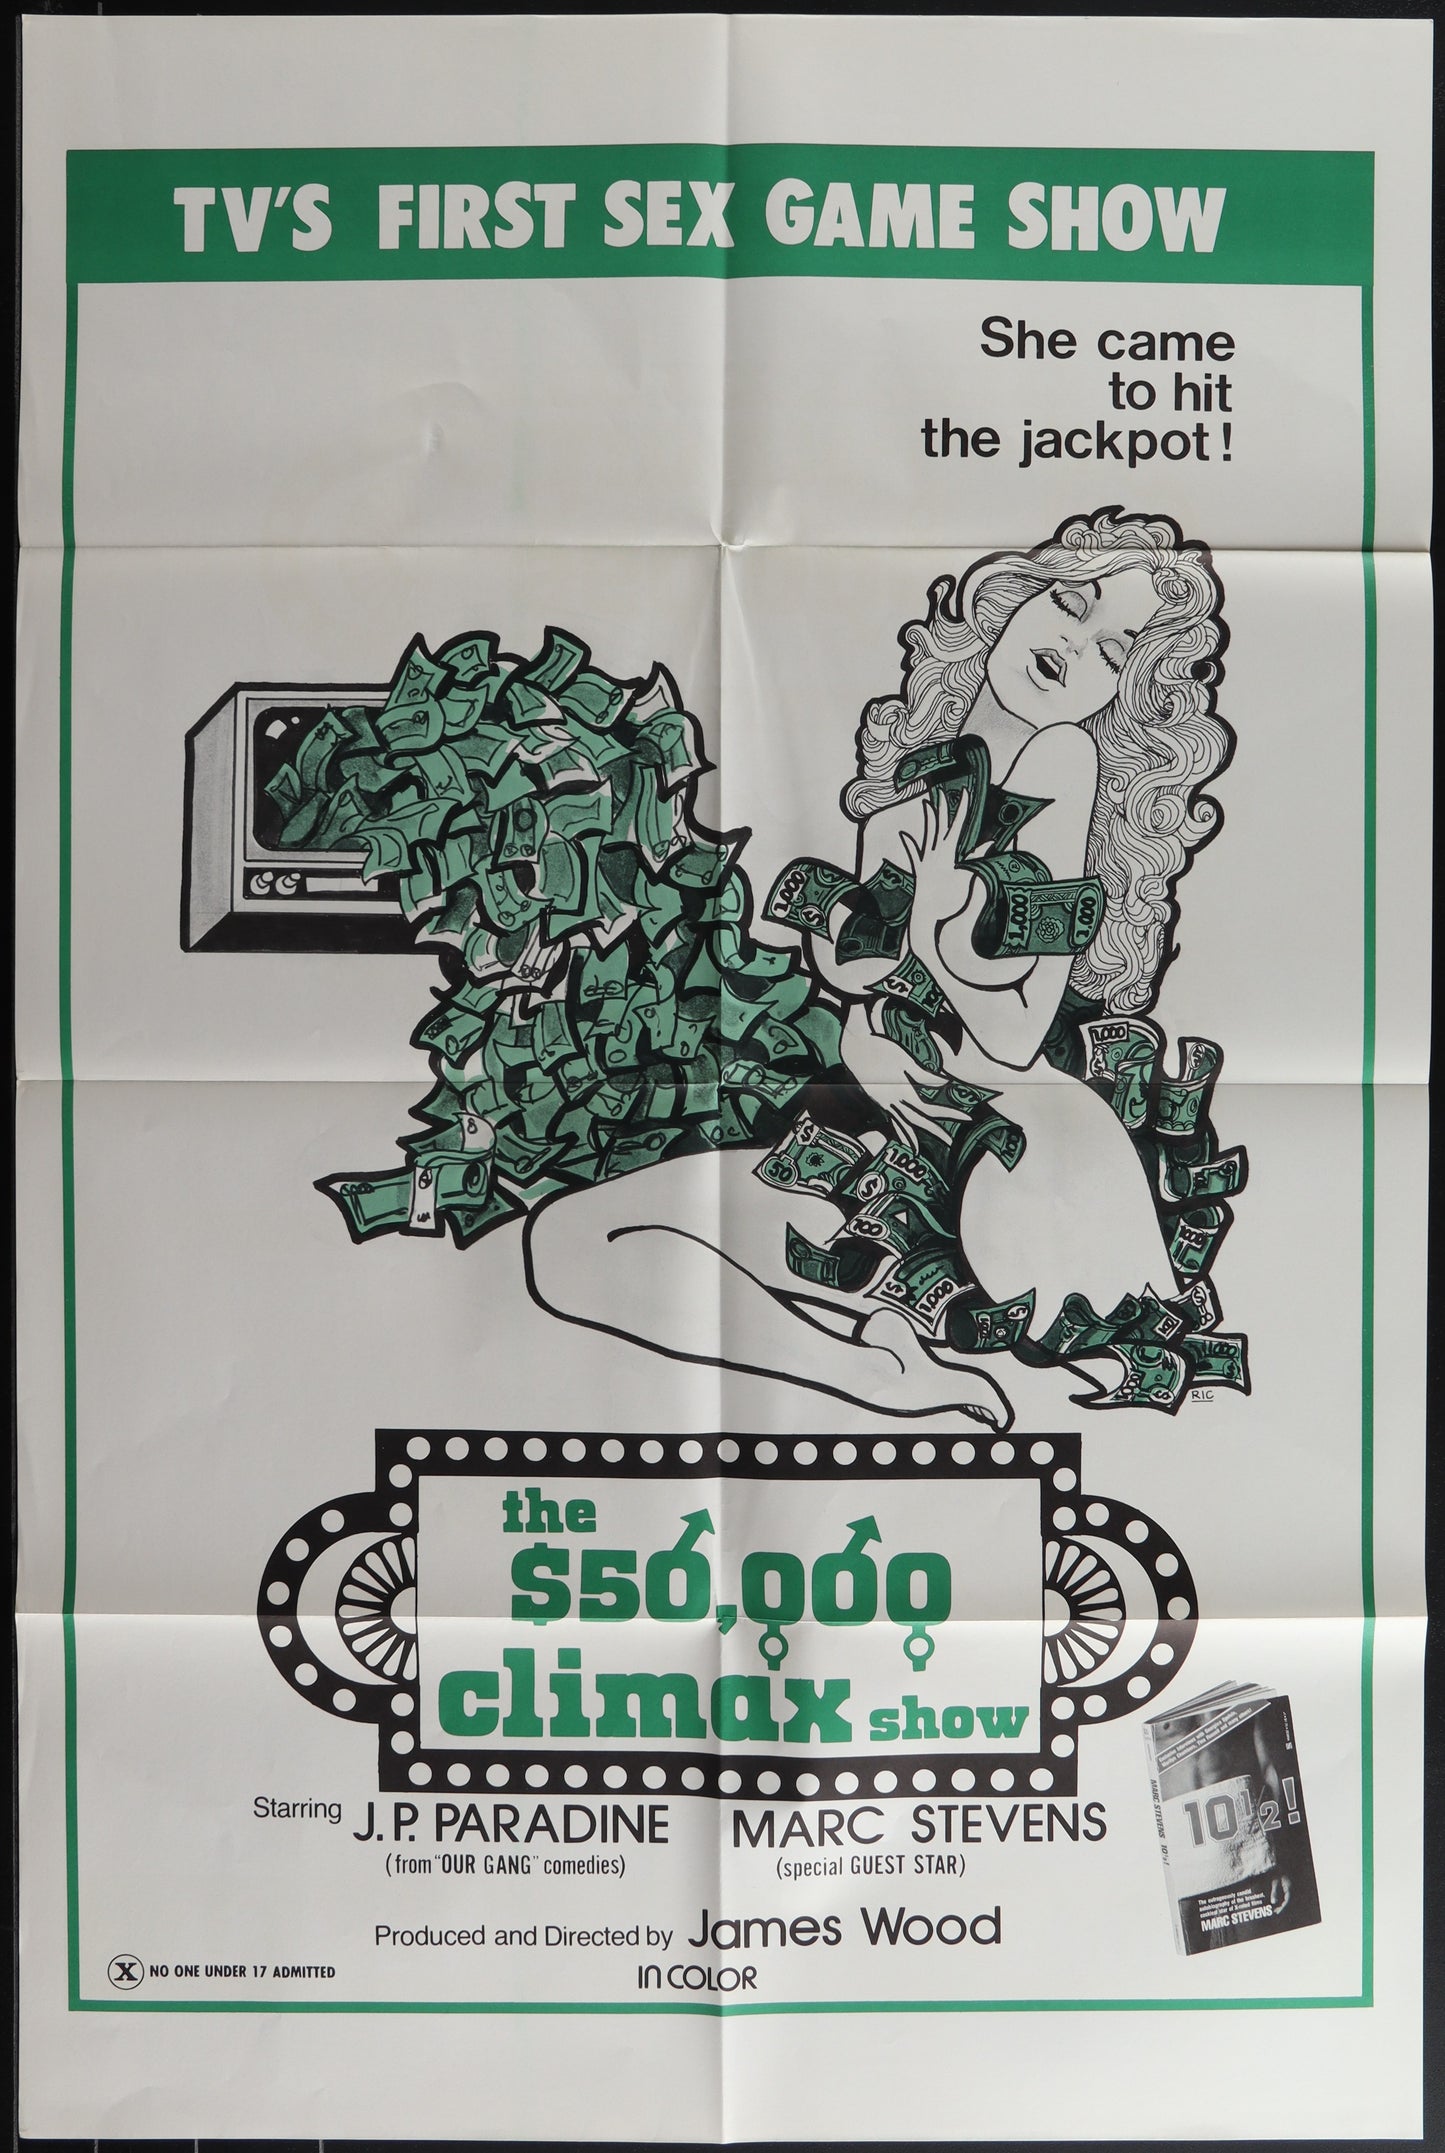 $50,000 CLIMAX SHOW (folded) movie poster